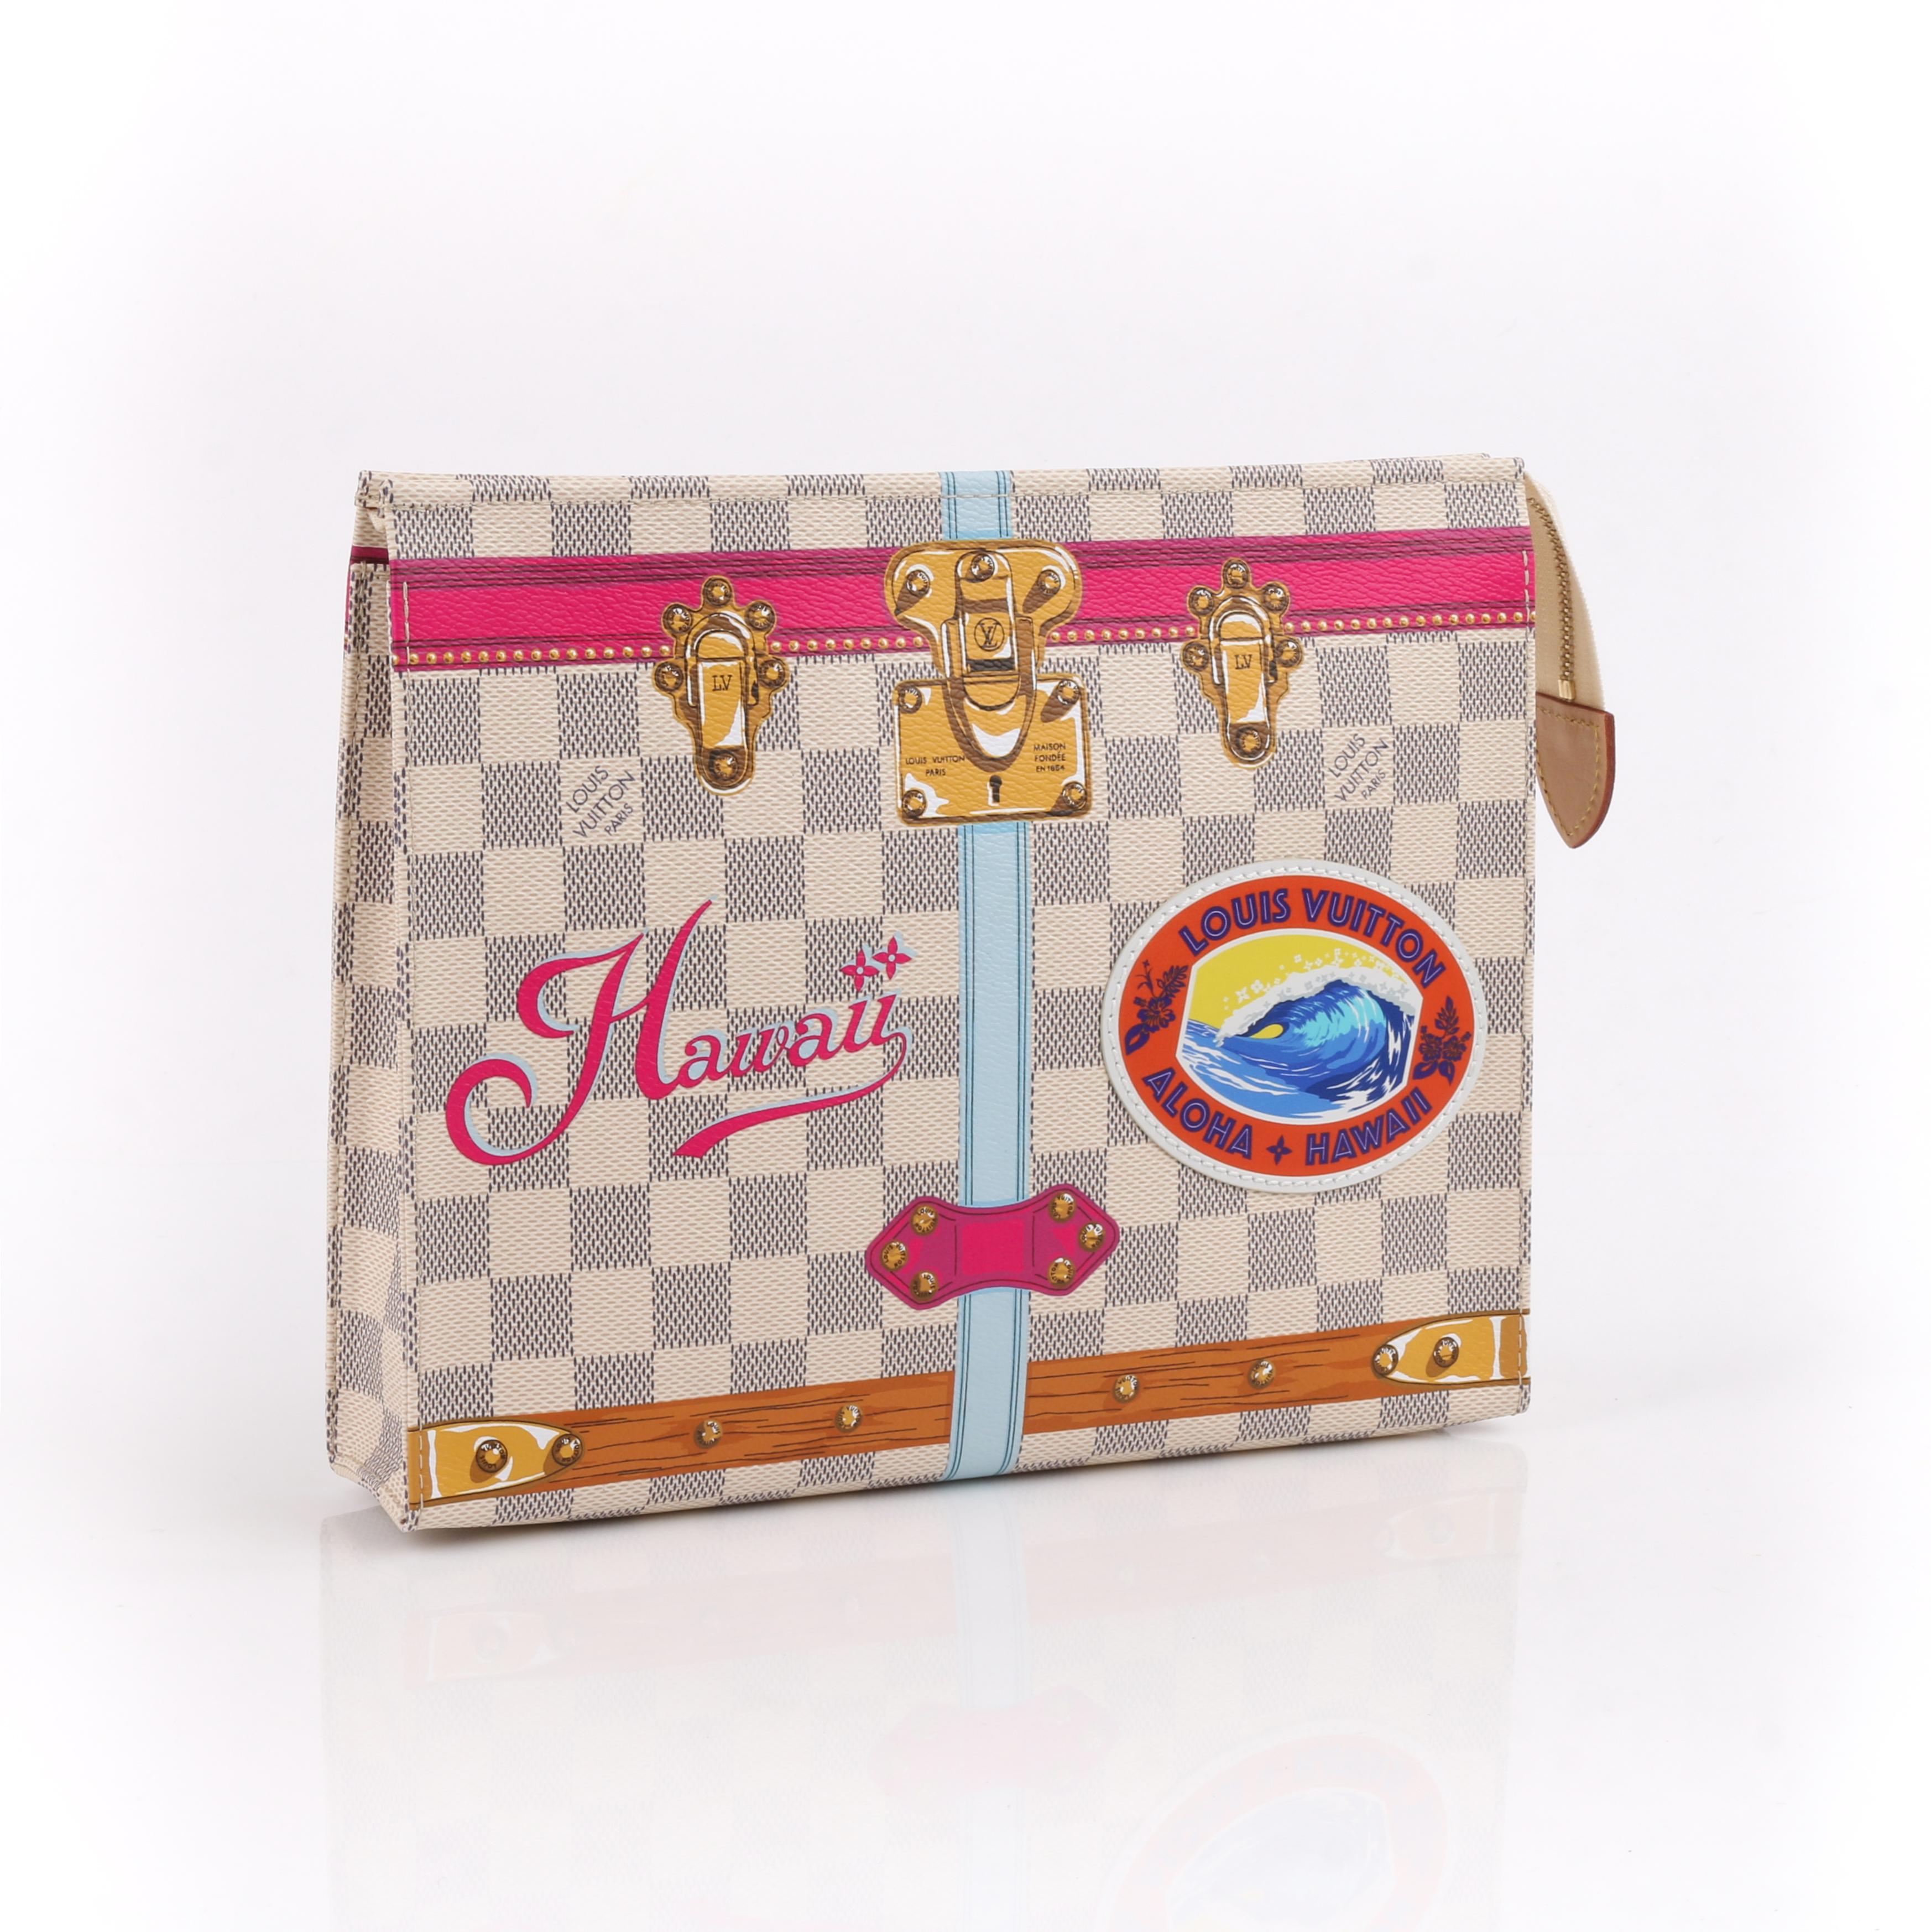 LOUIS VUITTON c.2018 Damier Azur Summer Trunk Hawaii Toiletry Pouch 26 - Limited Edition

Brand / Manufacturer: Louis Vuitton
Collection: 2018 Resort
Manufacturer Style Name: Toiletry Pouch 26
Color(s): Shades of blue, tan, white, light blue, brown,